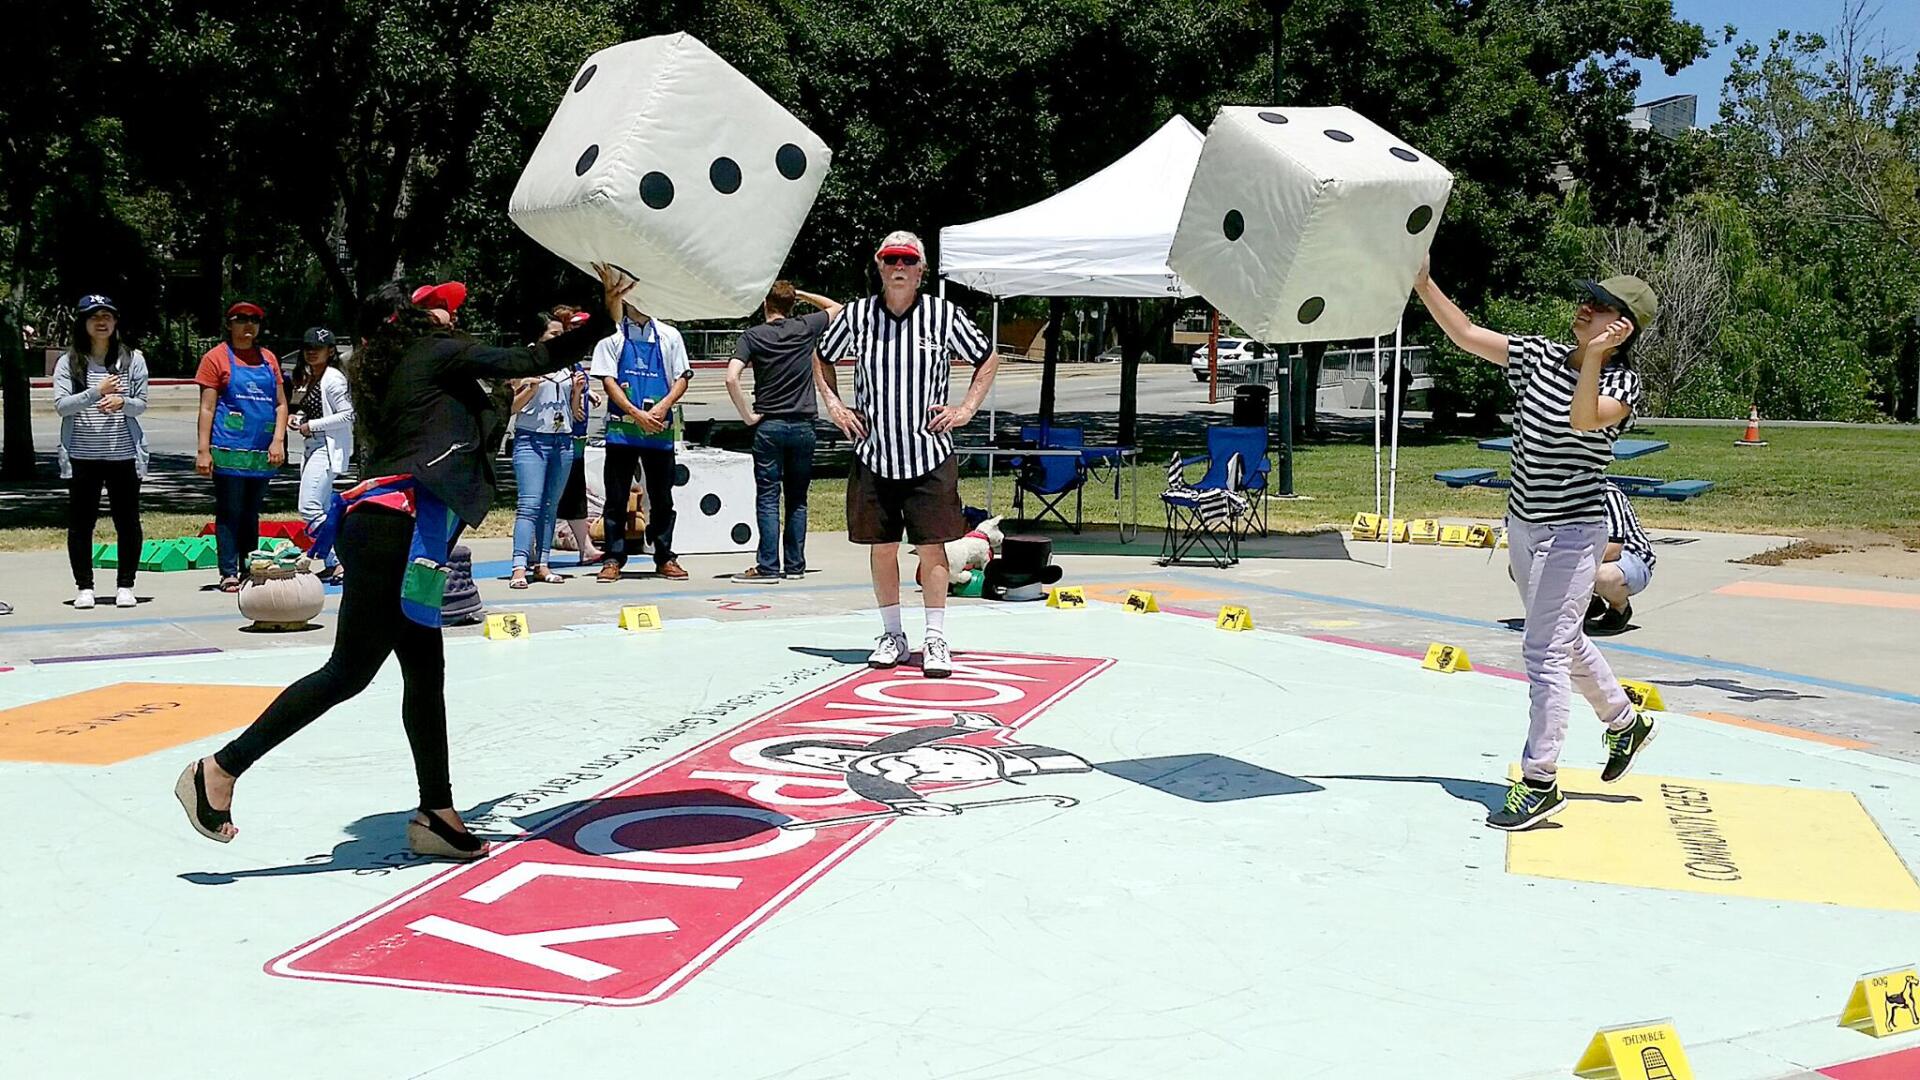 World's Largest Monopoly Board Sculpture: world record set in San Jose, California